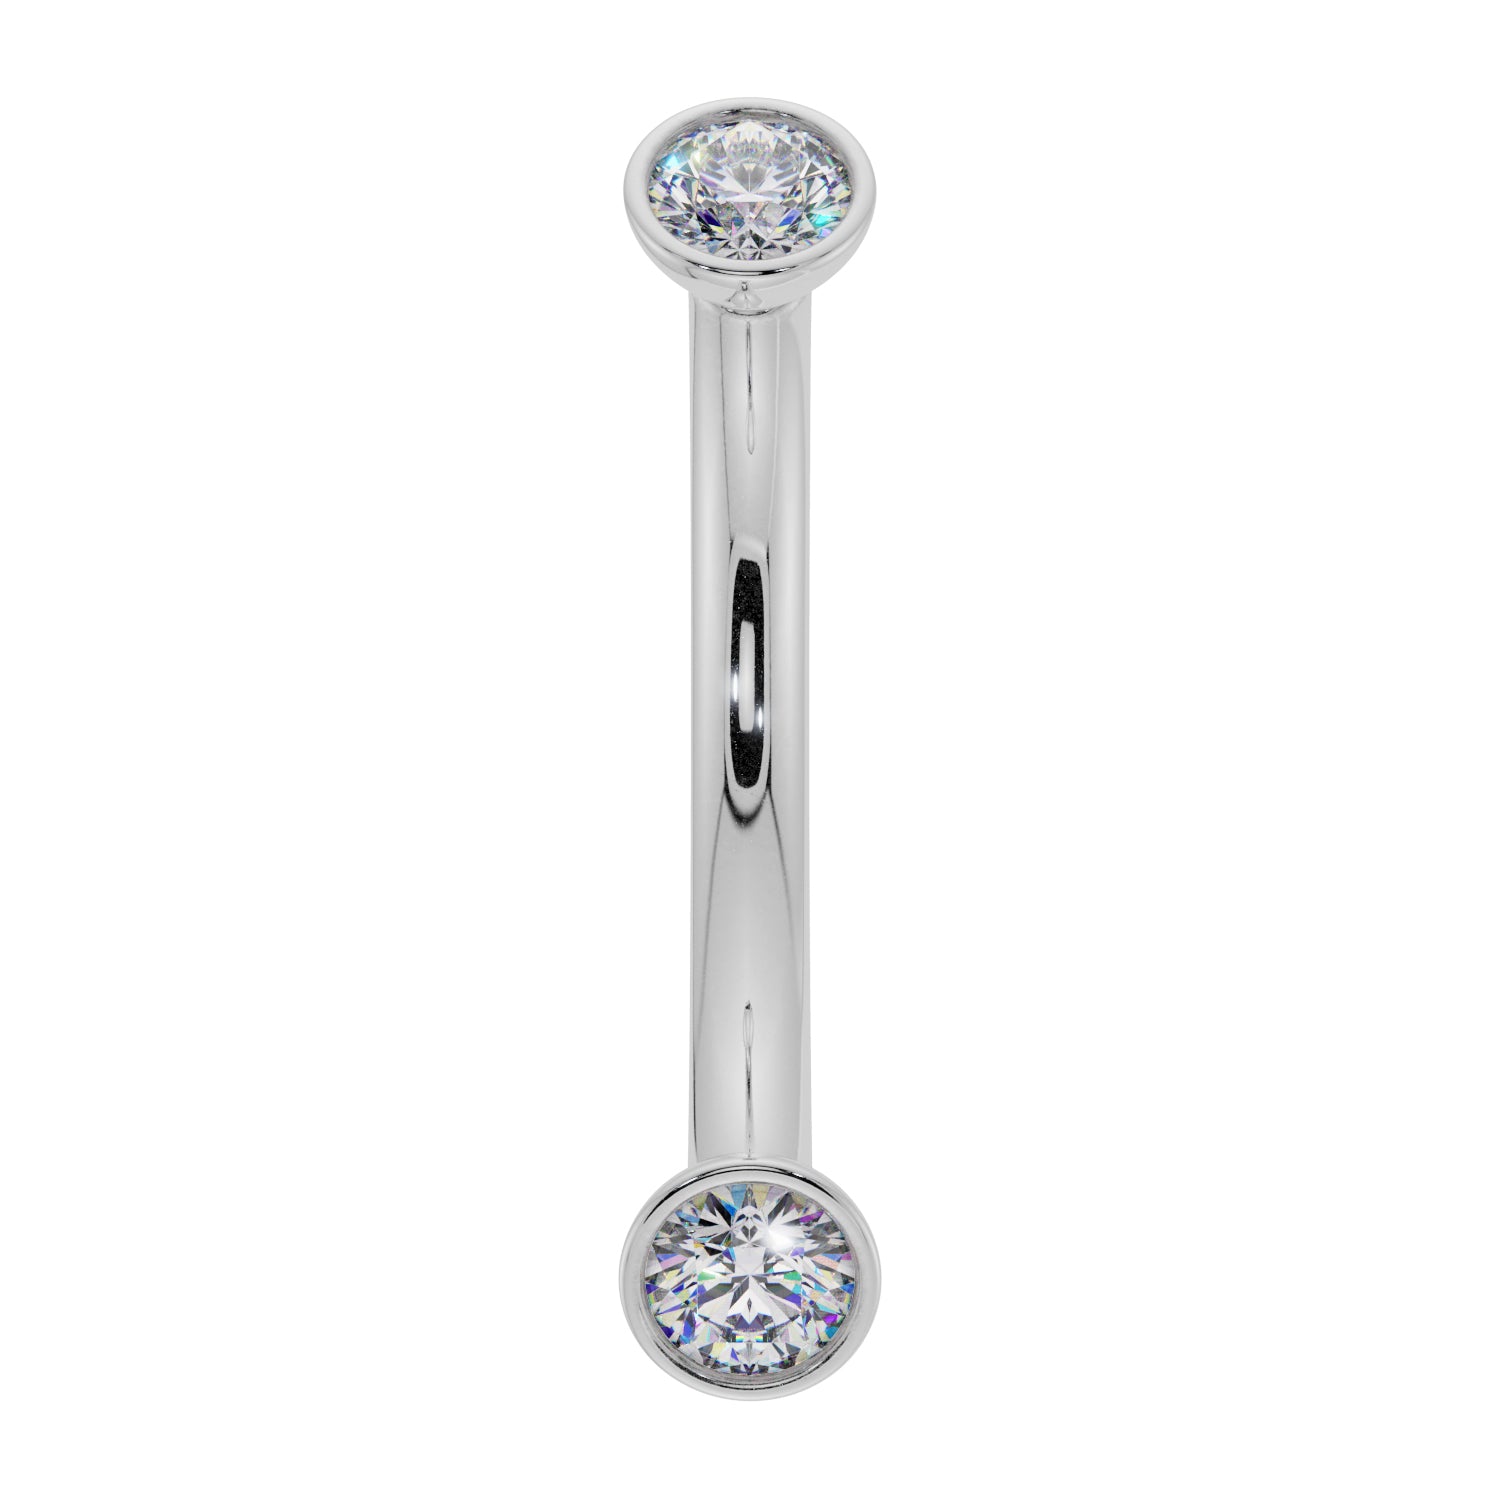 Dainty Diamond Bezel-Set Curved Barbell for Eyebrow Rook Belly-14K White Gold   16G (1.2mm)   7 16